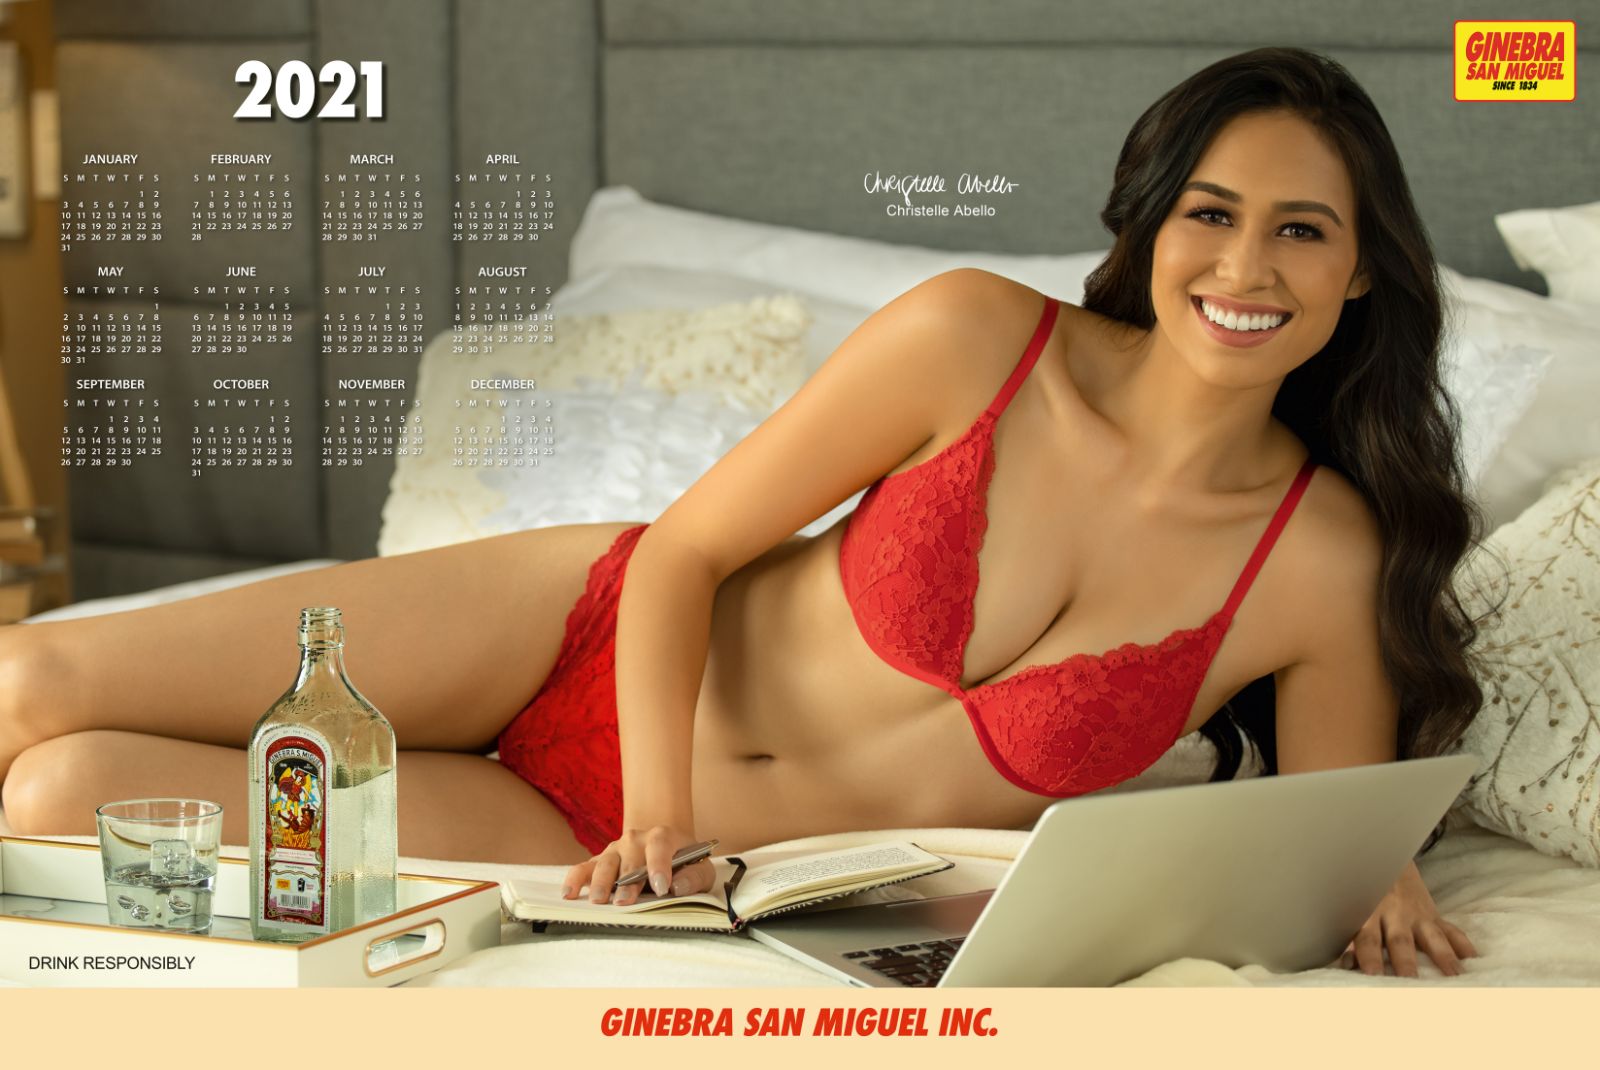 And Your 2021 Ginebra San Miguel Calendar Girl Is Christelle Abello!